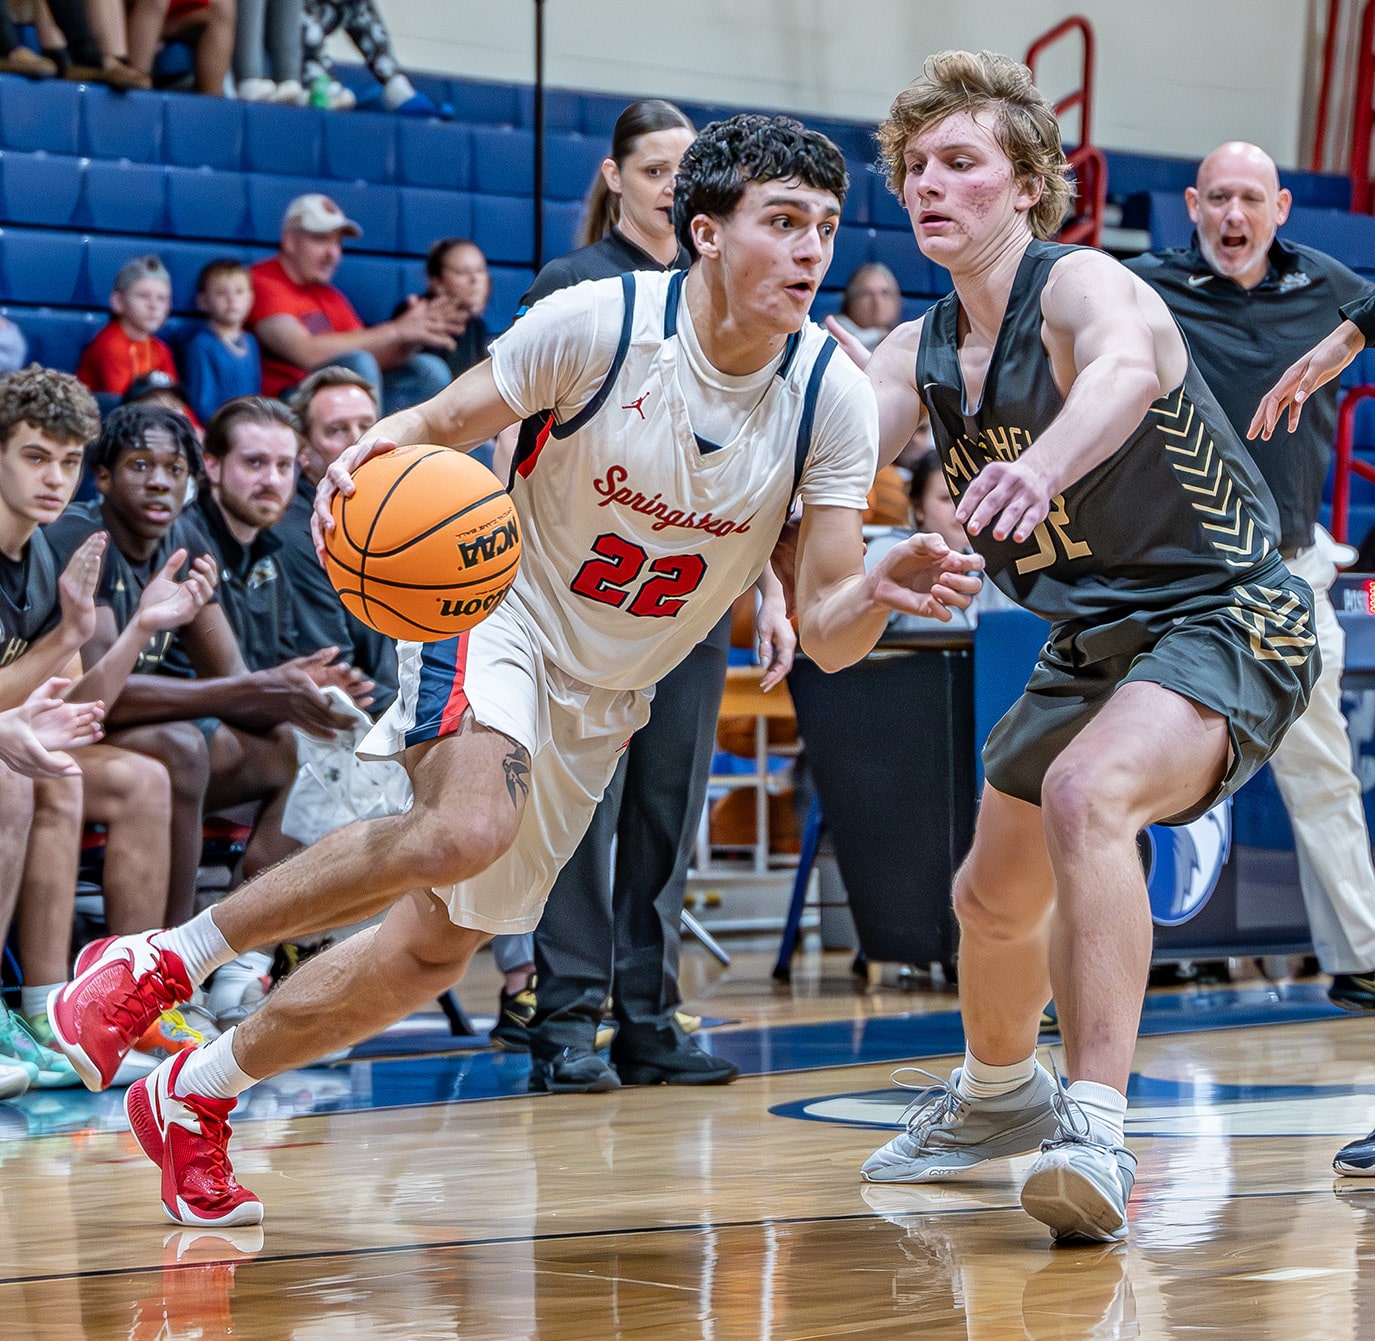 Springstead, 22, Adrian D’Acunto drives past Mitchell High, 32, Brock Peterson in the Eagles 6A Division 4 playoff win Tuesday evening at Springstead High. [Photo by Joe DiCristofalo]